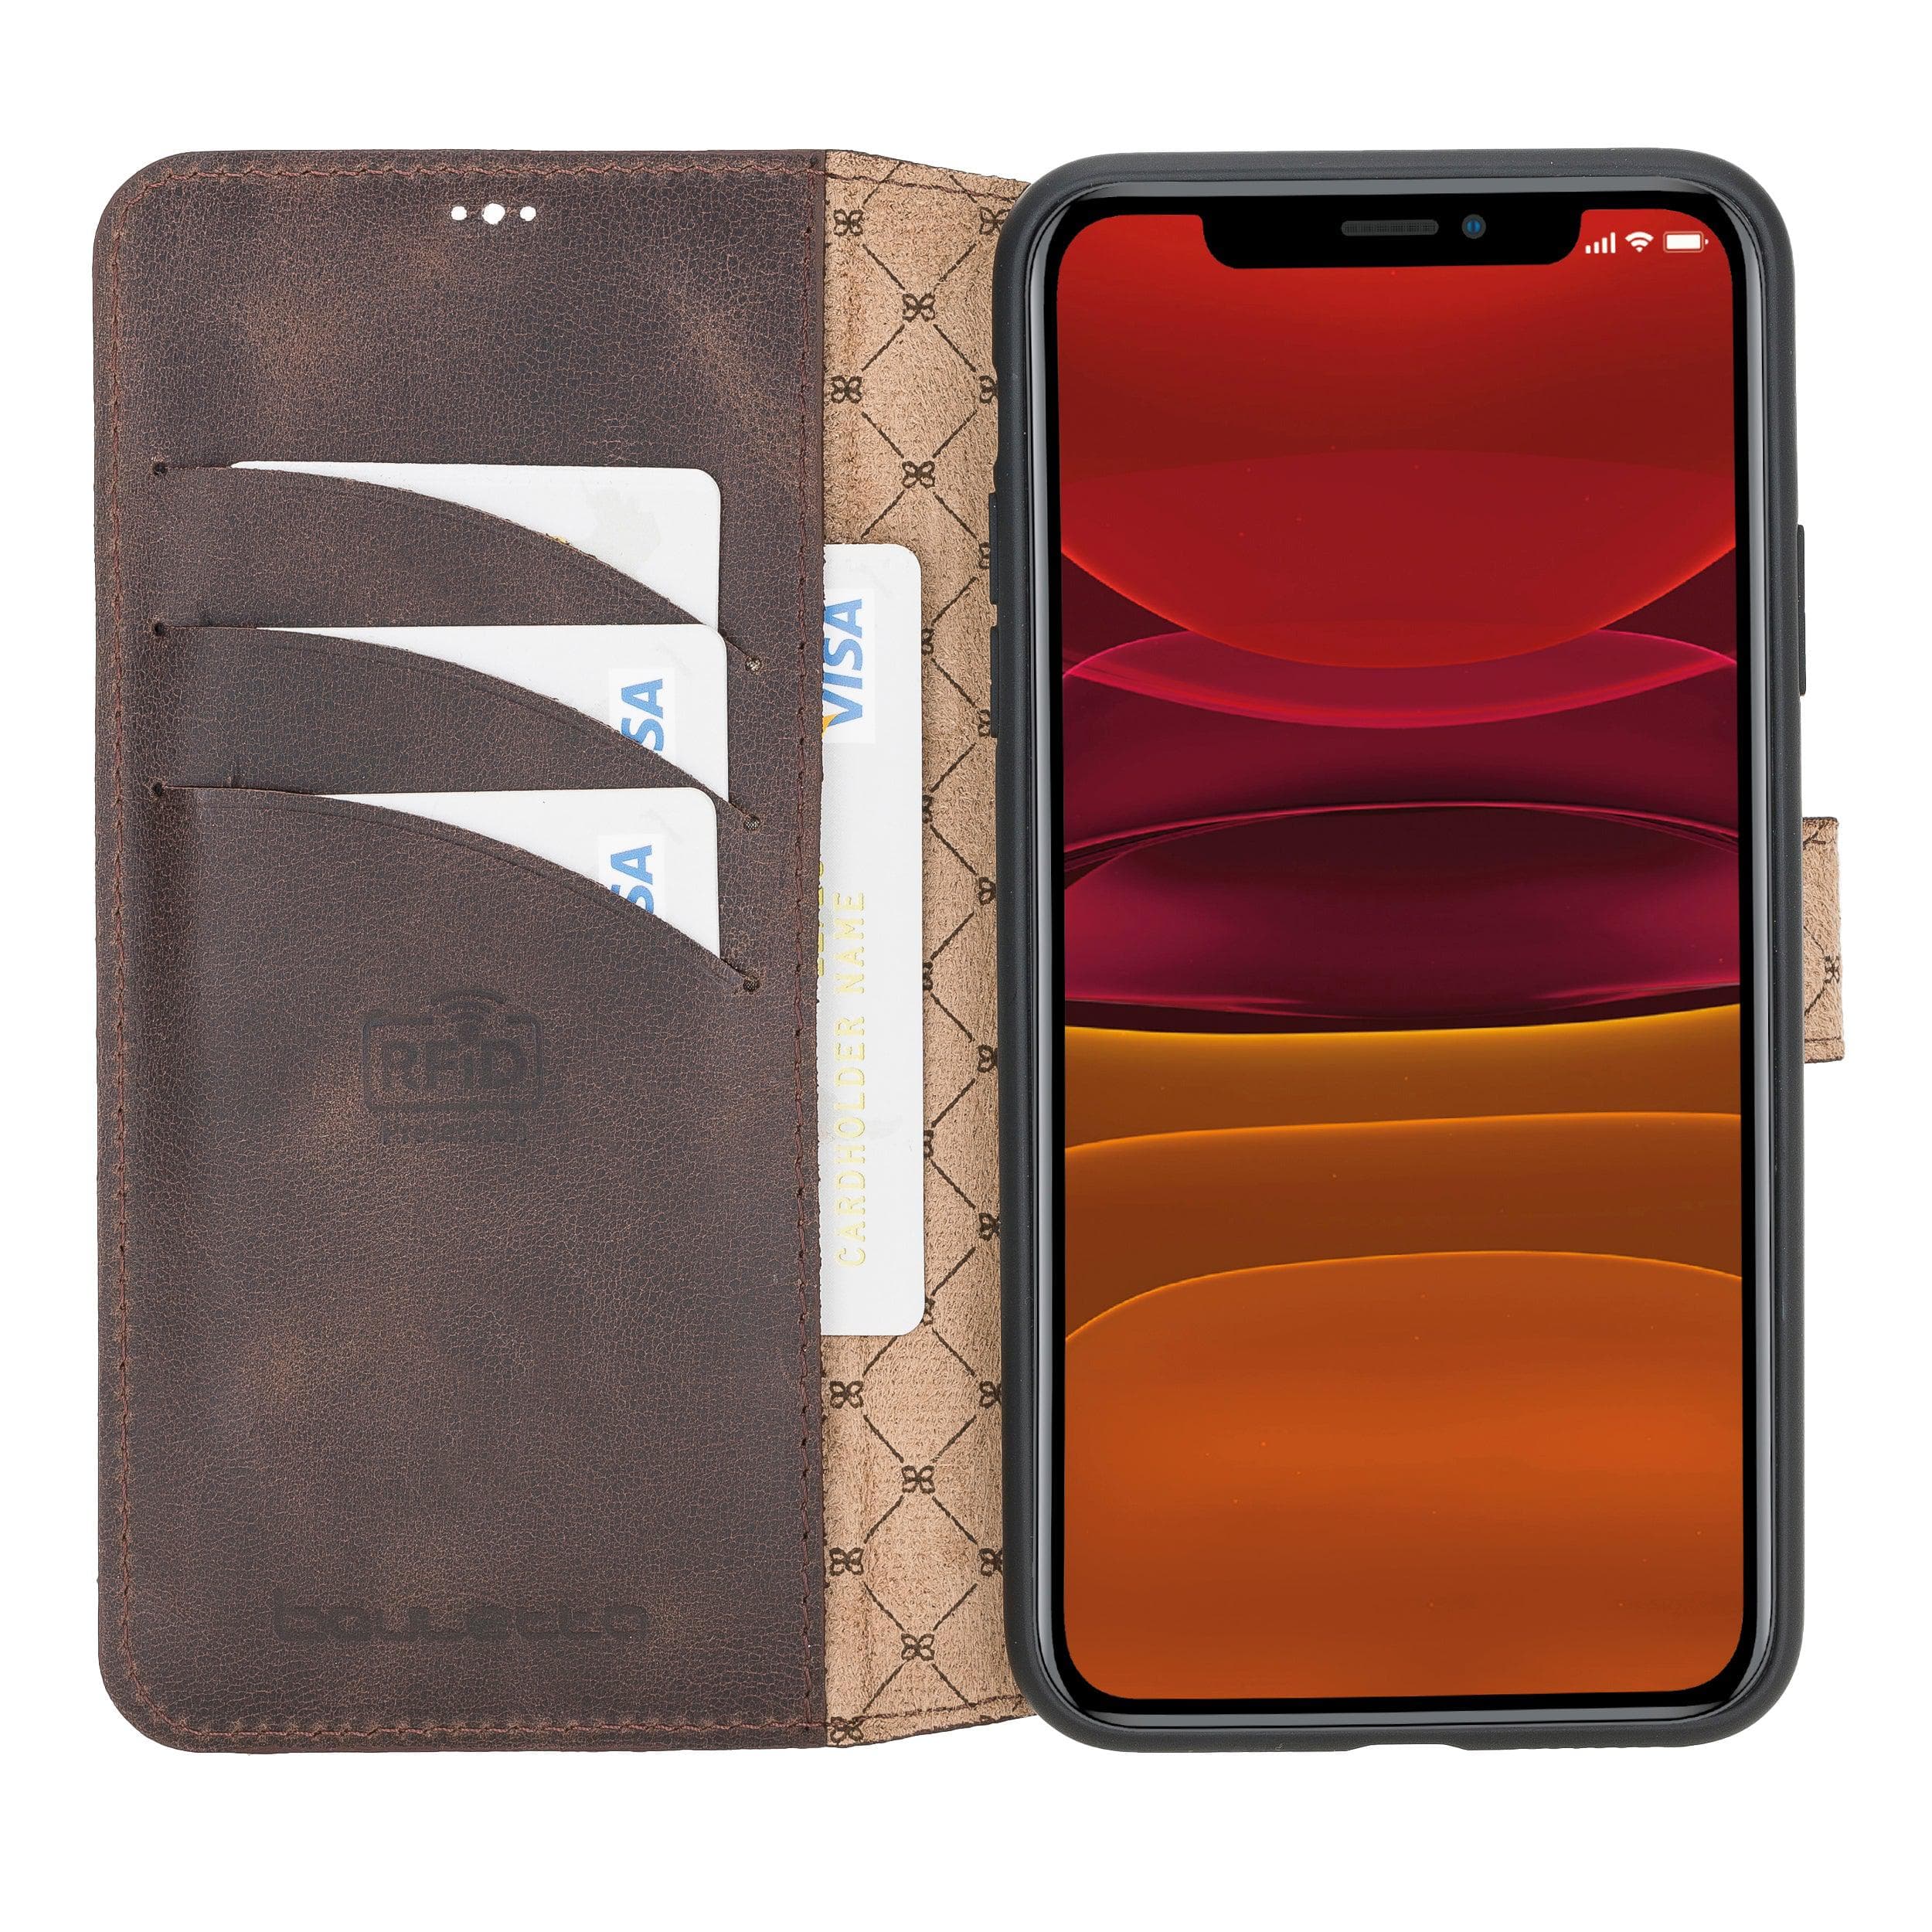 Wallet Folio with ID Slot Leather Wallet Case For Apple iPhone 11 Series İPhone 11 Promax / Dark Brown Bouletta LTD